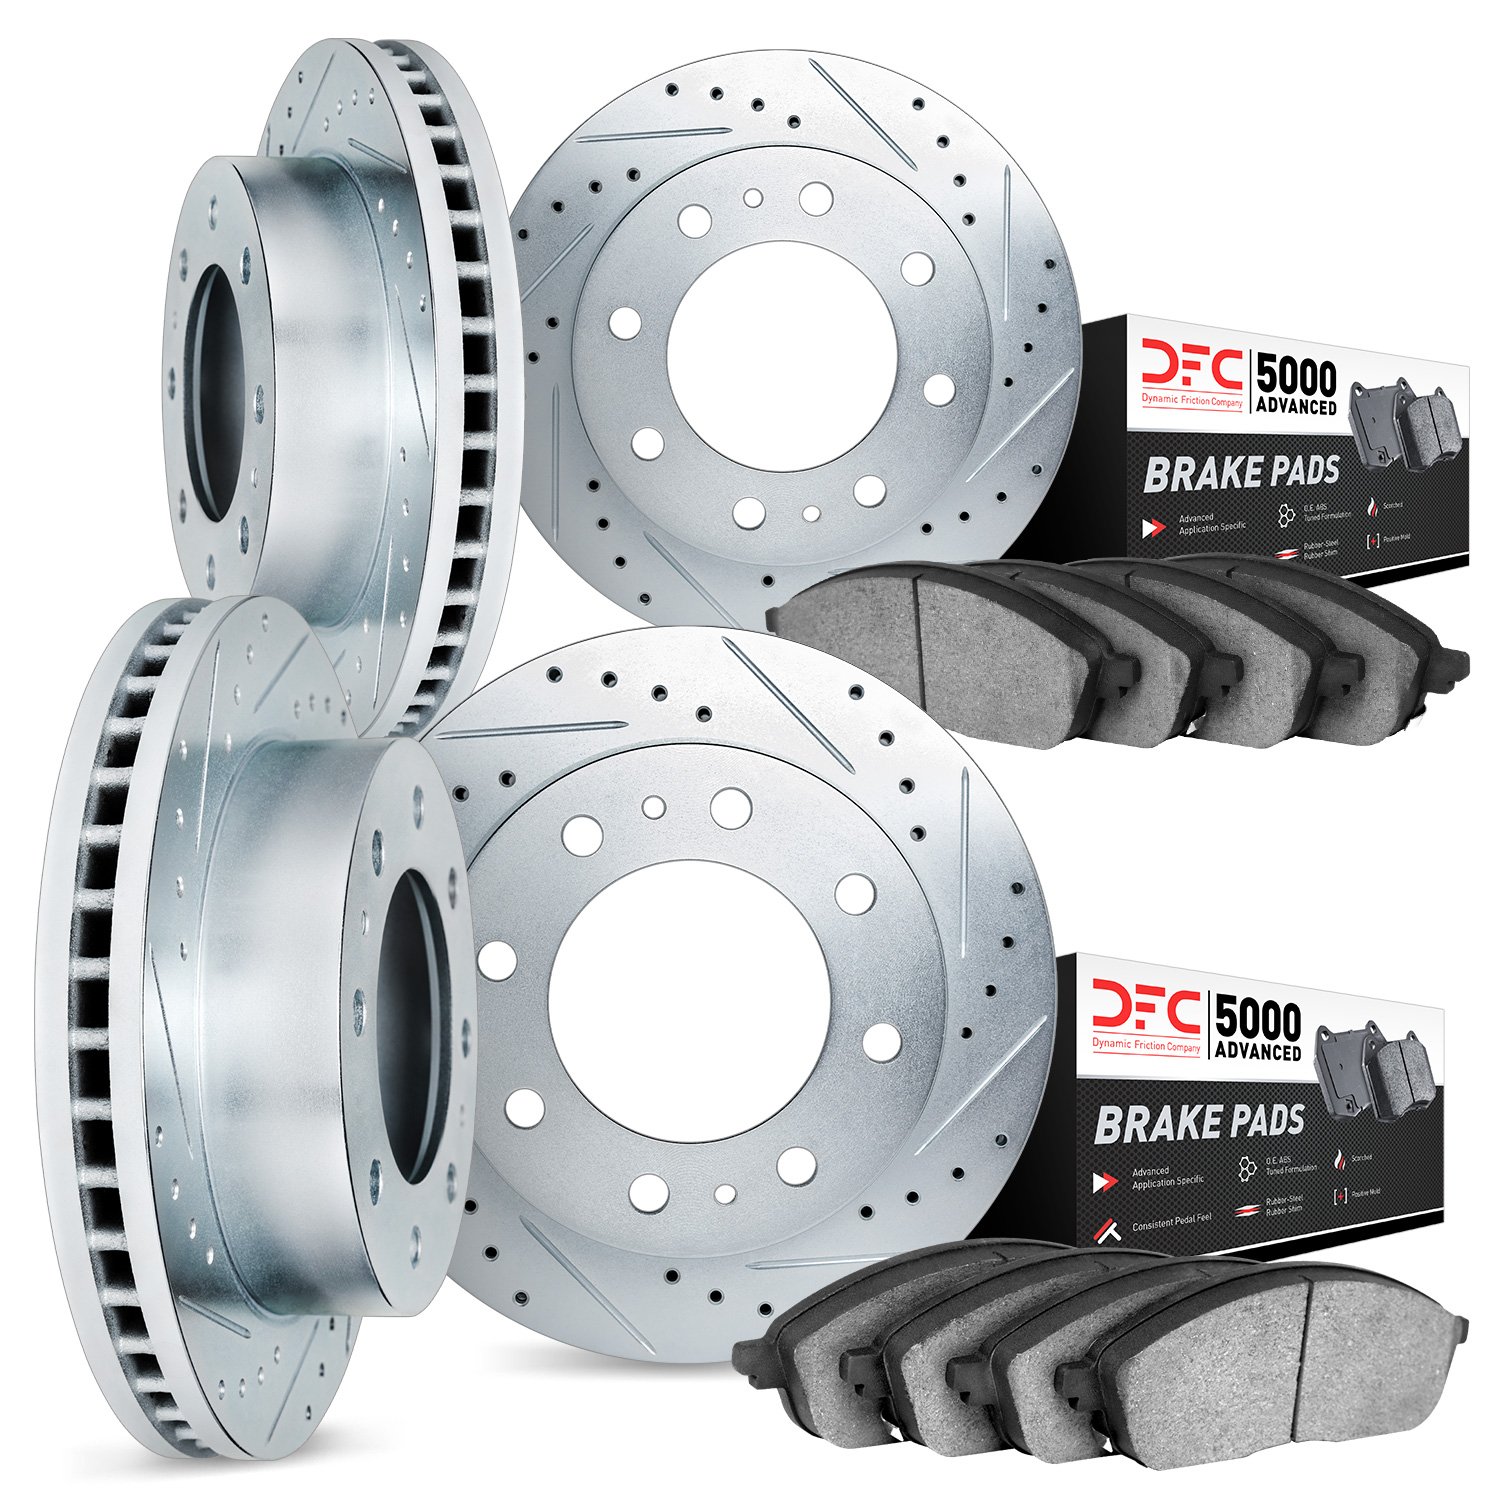 7504-40248 Drilled/Slotted Brake Rotors w/5000 Advanced Brake Pads Kit [Silver], Fits Select Mopar, Position: Front and Rear